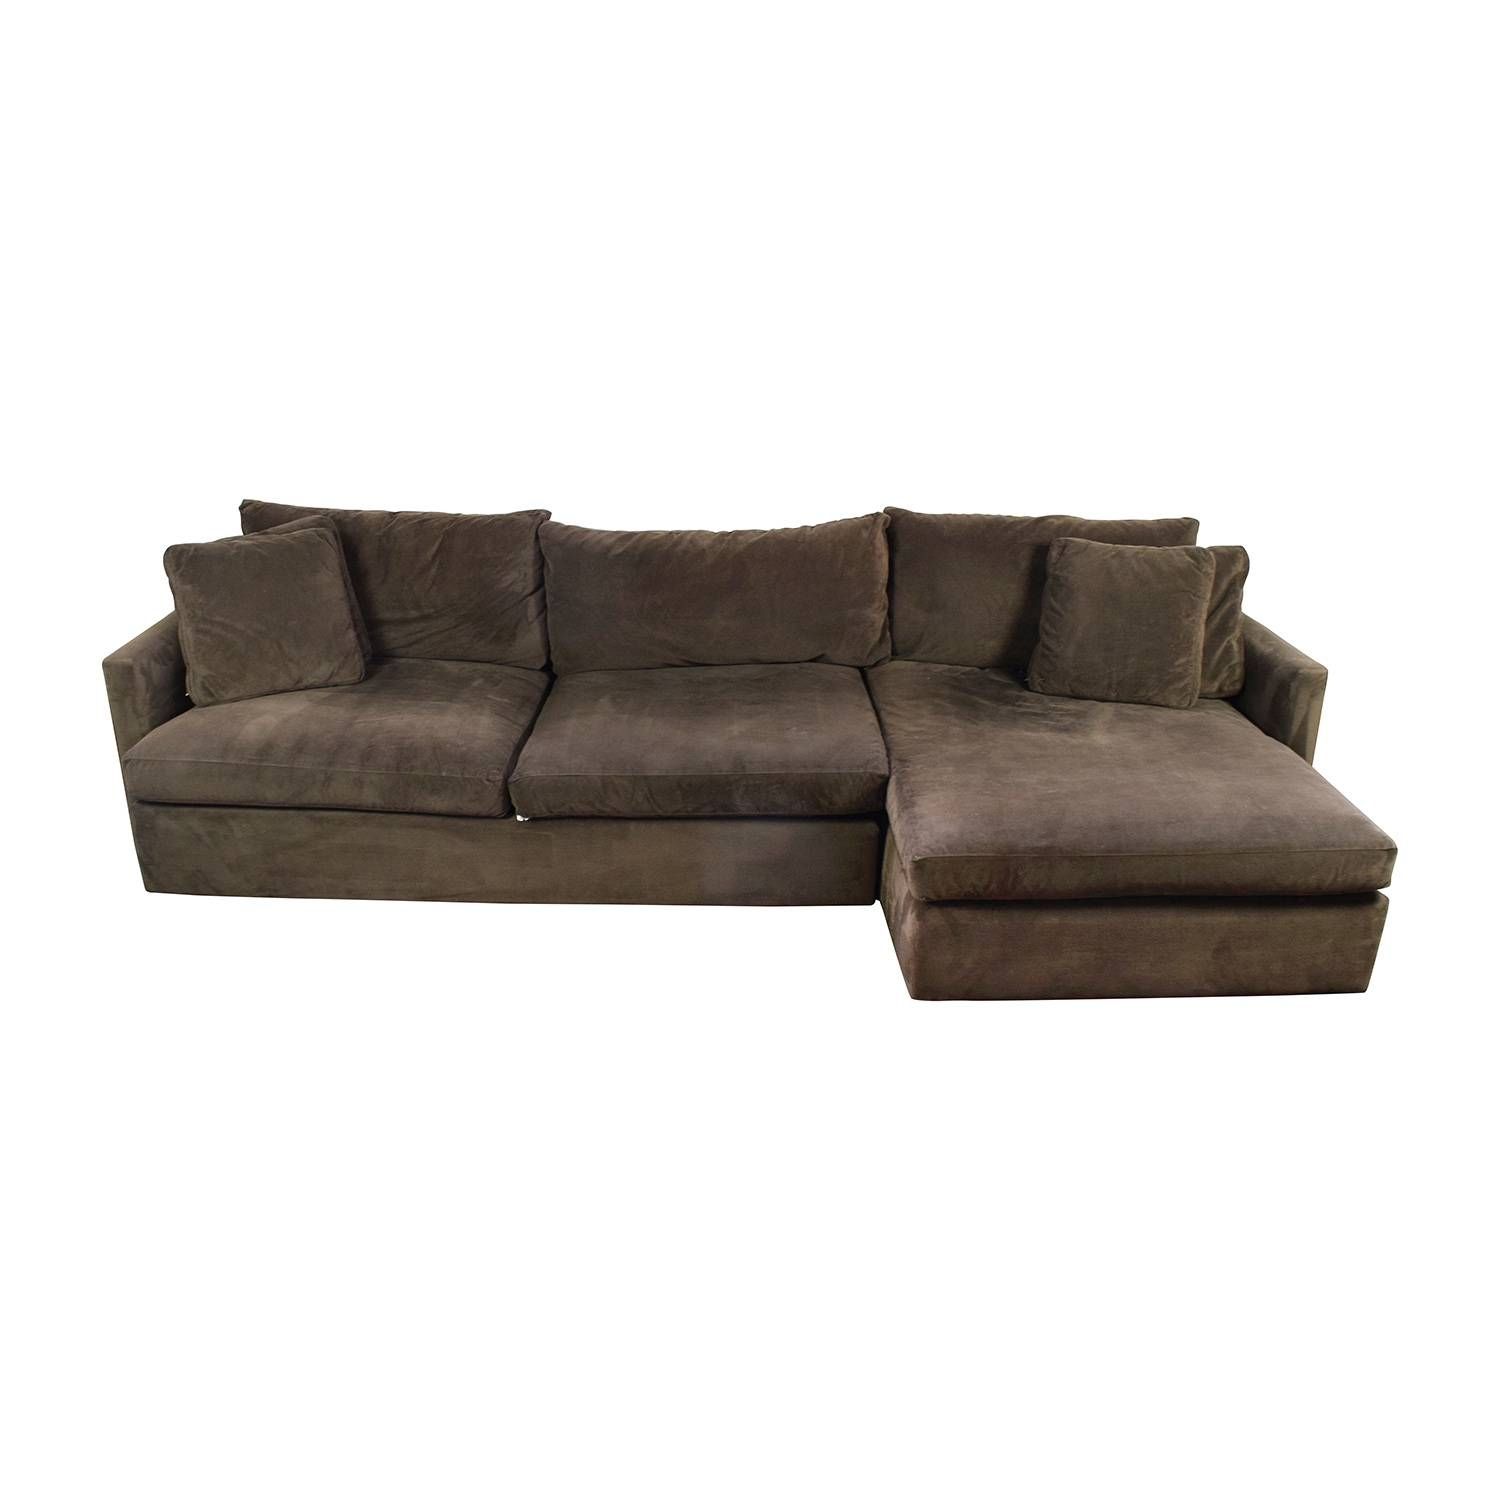 89% Off – Crate And Barrel Crate & Barrel Brown Left Arm Sectional Regarding Crate And Barrel Sectional Sofas (Photo 6 of 30)